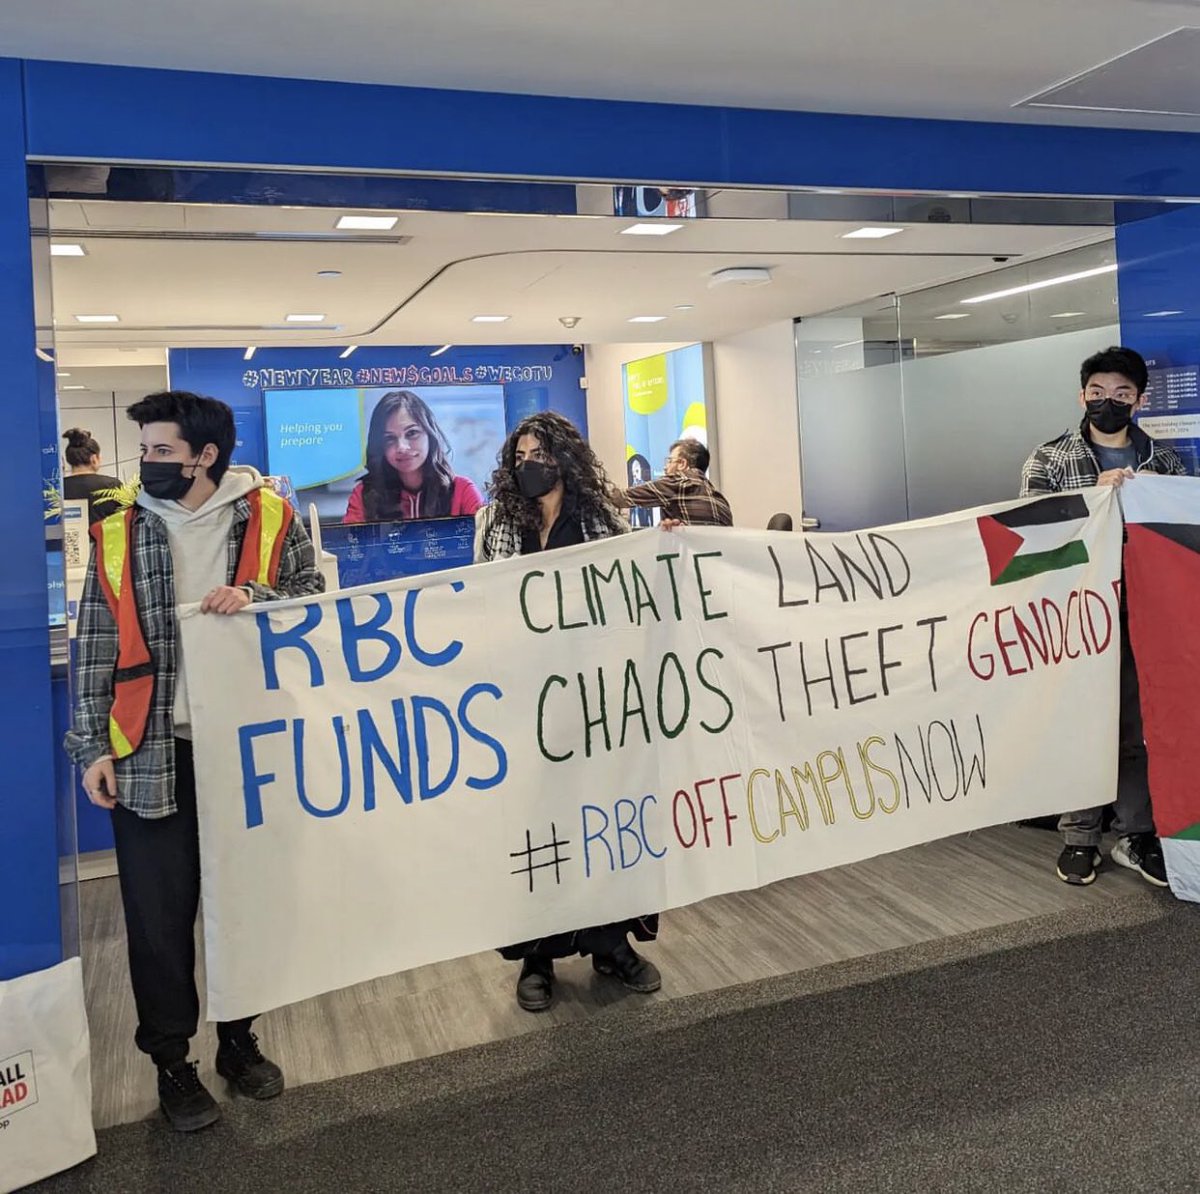 BREAKING: students at the university of Guelph stage a die in in front of the @RBC OnCampus branch. We demand RBC divest from fossil fuels and respect indigenous sovereignty from Turtle Island to Palestine. #RBCOffCampus